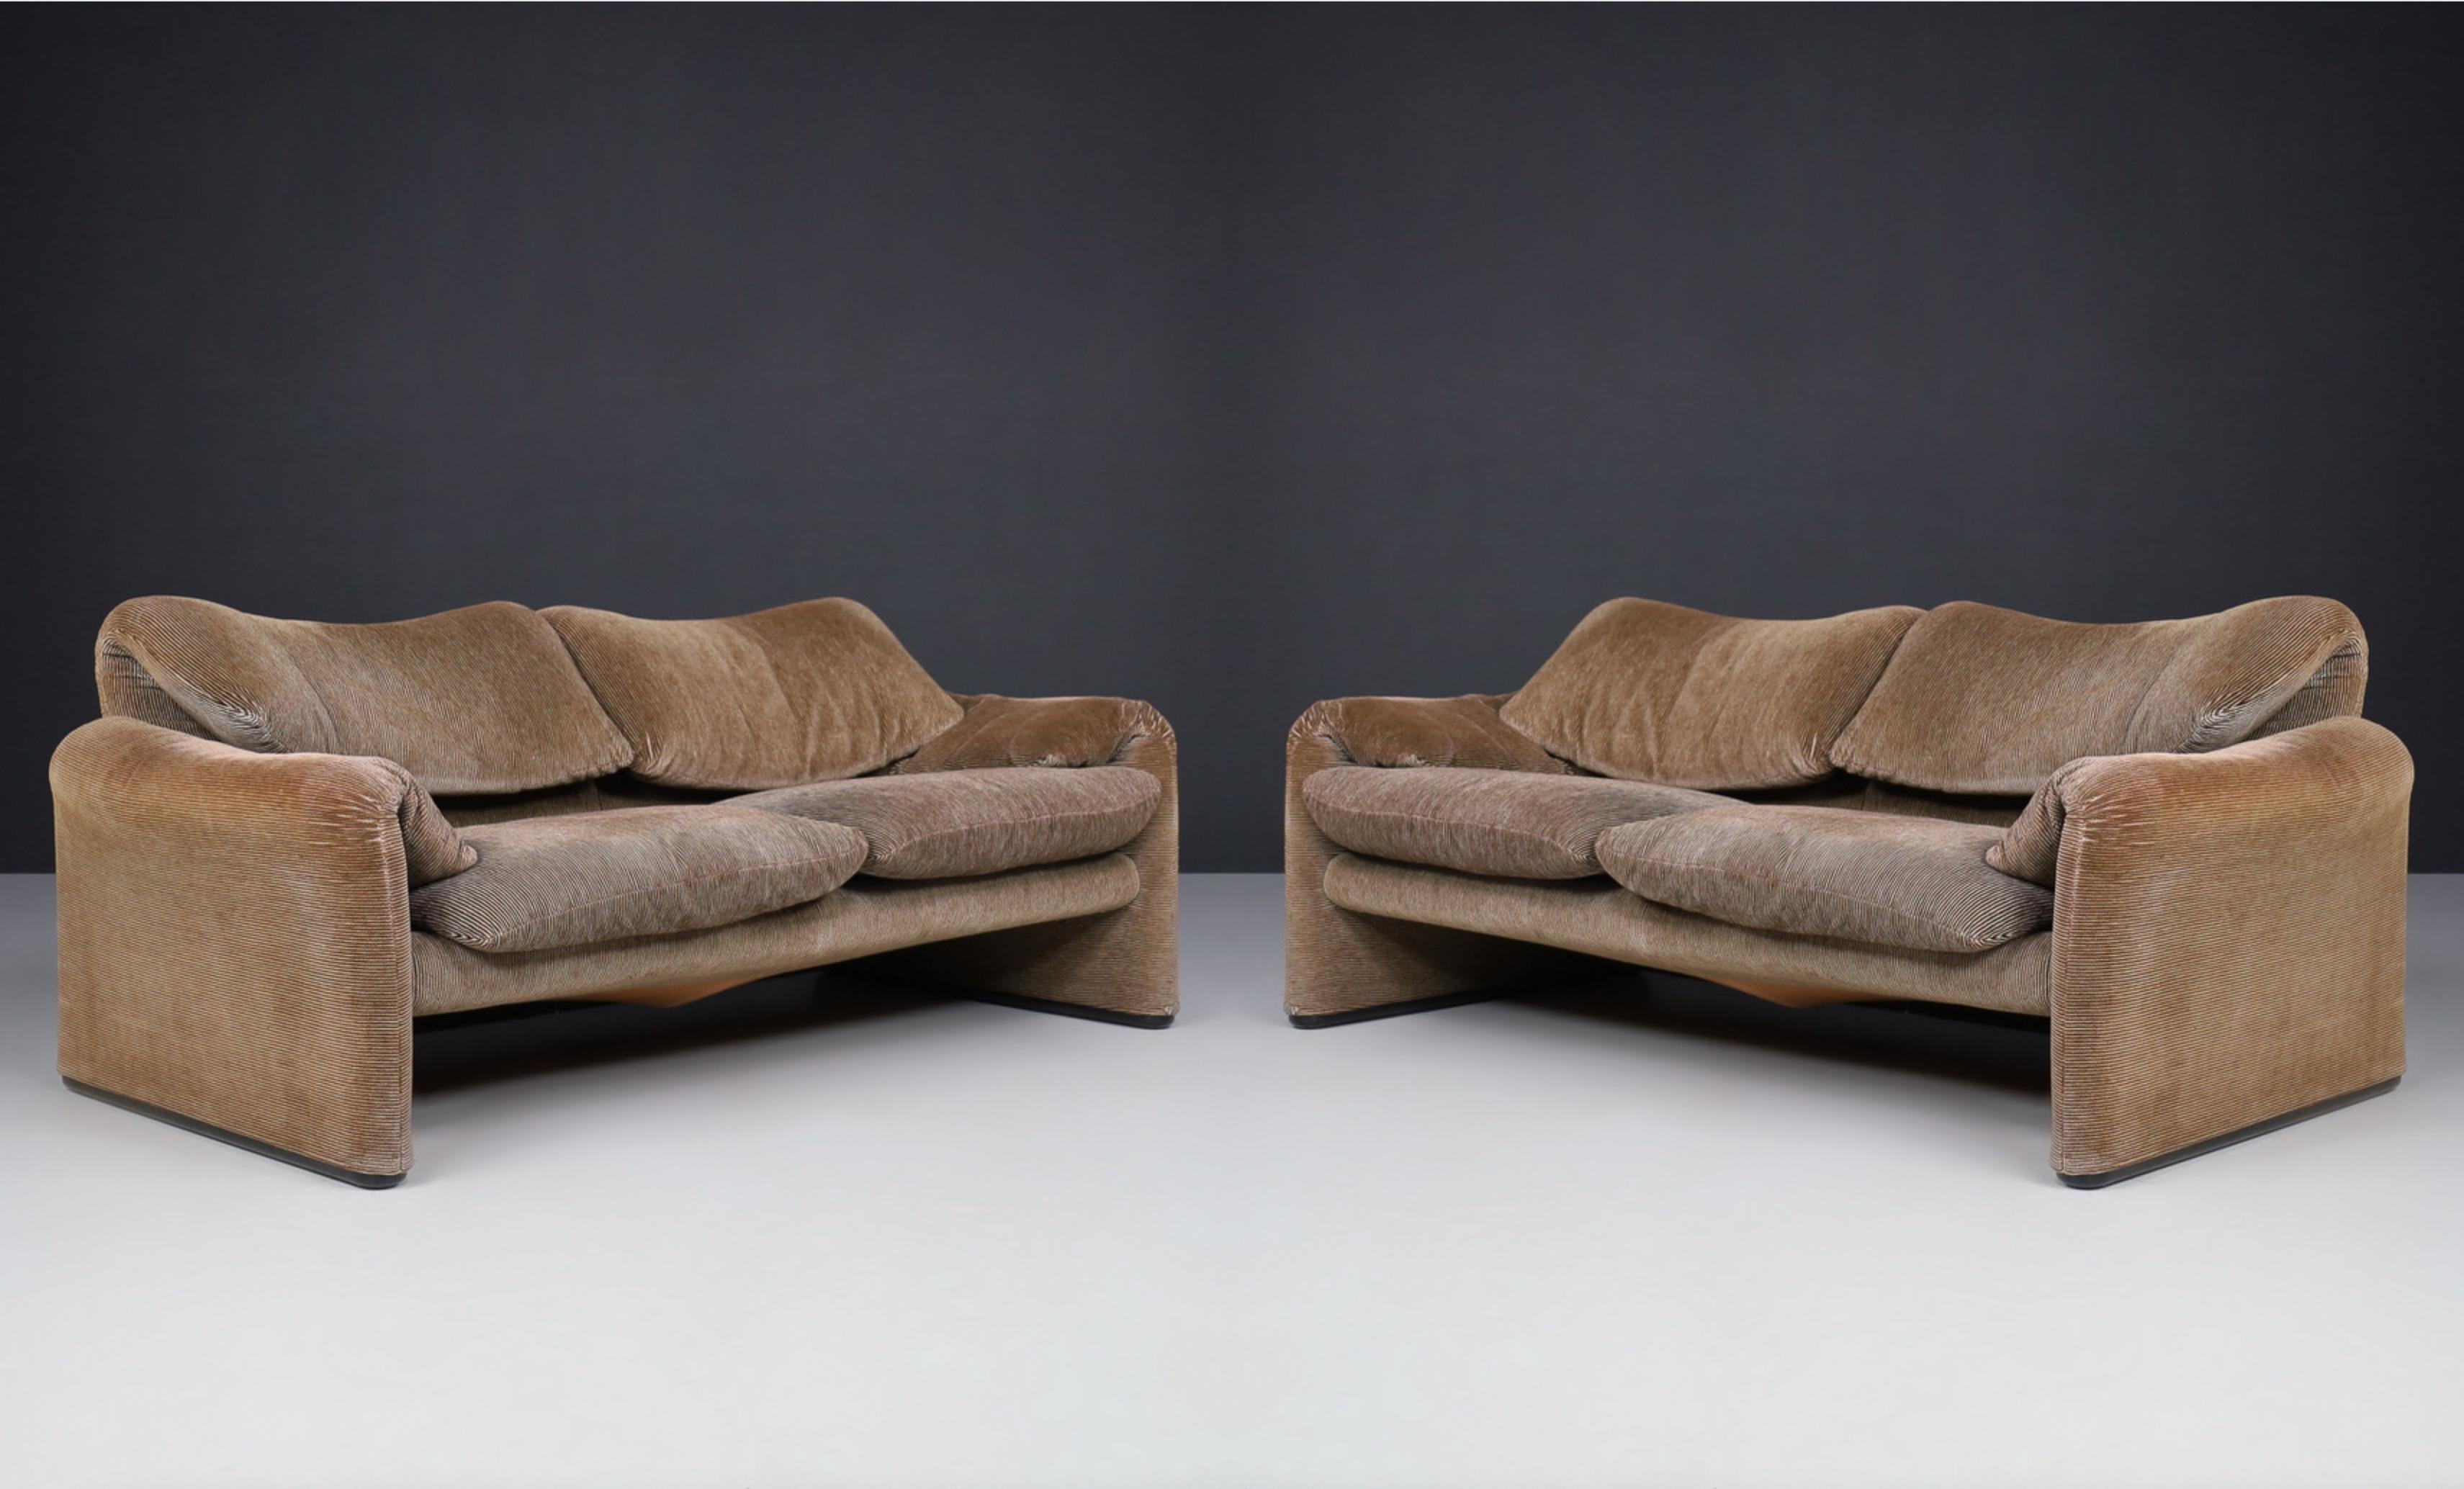 Maralunga sofas by Vico Magistretti for Cassina, 1970s

An exemplary version of the iconic Maralunga sofas in original vintage fabric. The overall impression of this two-seater couch is excellent. Please note that the material shows minor signs of